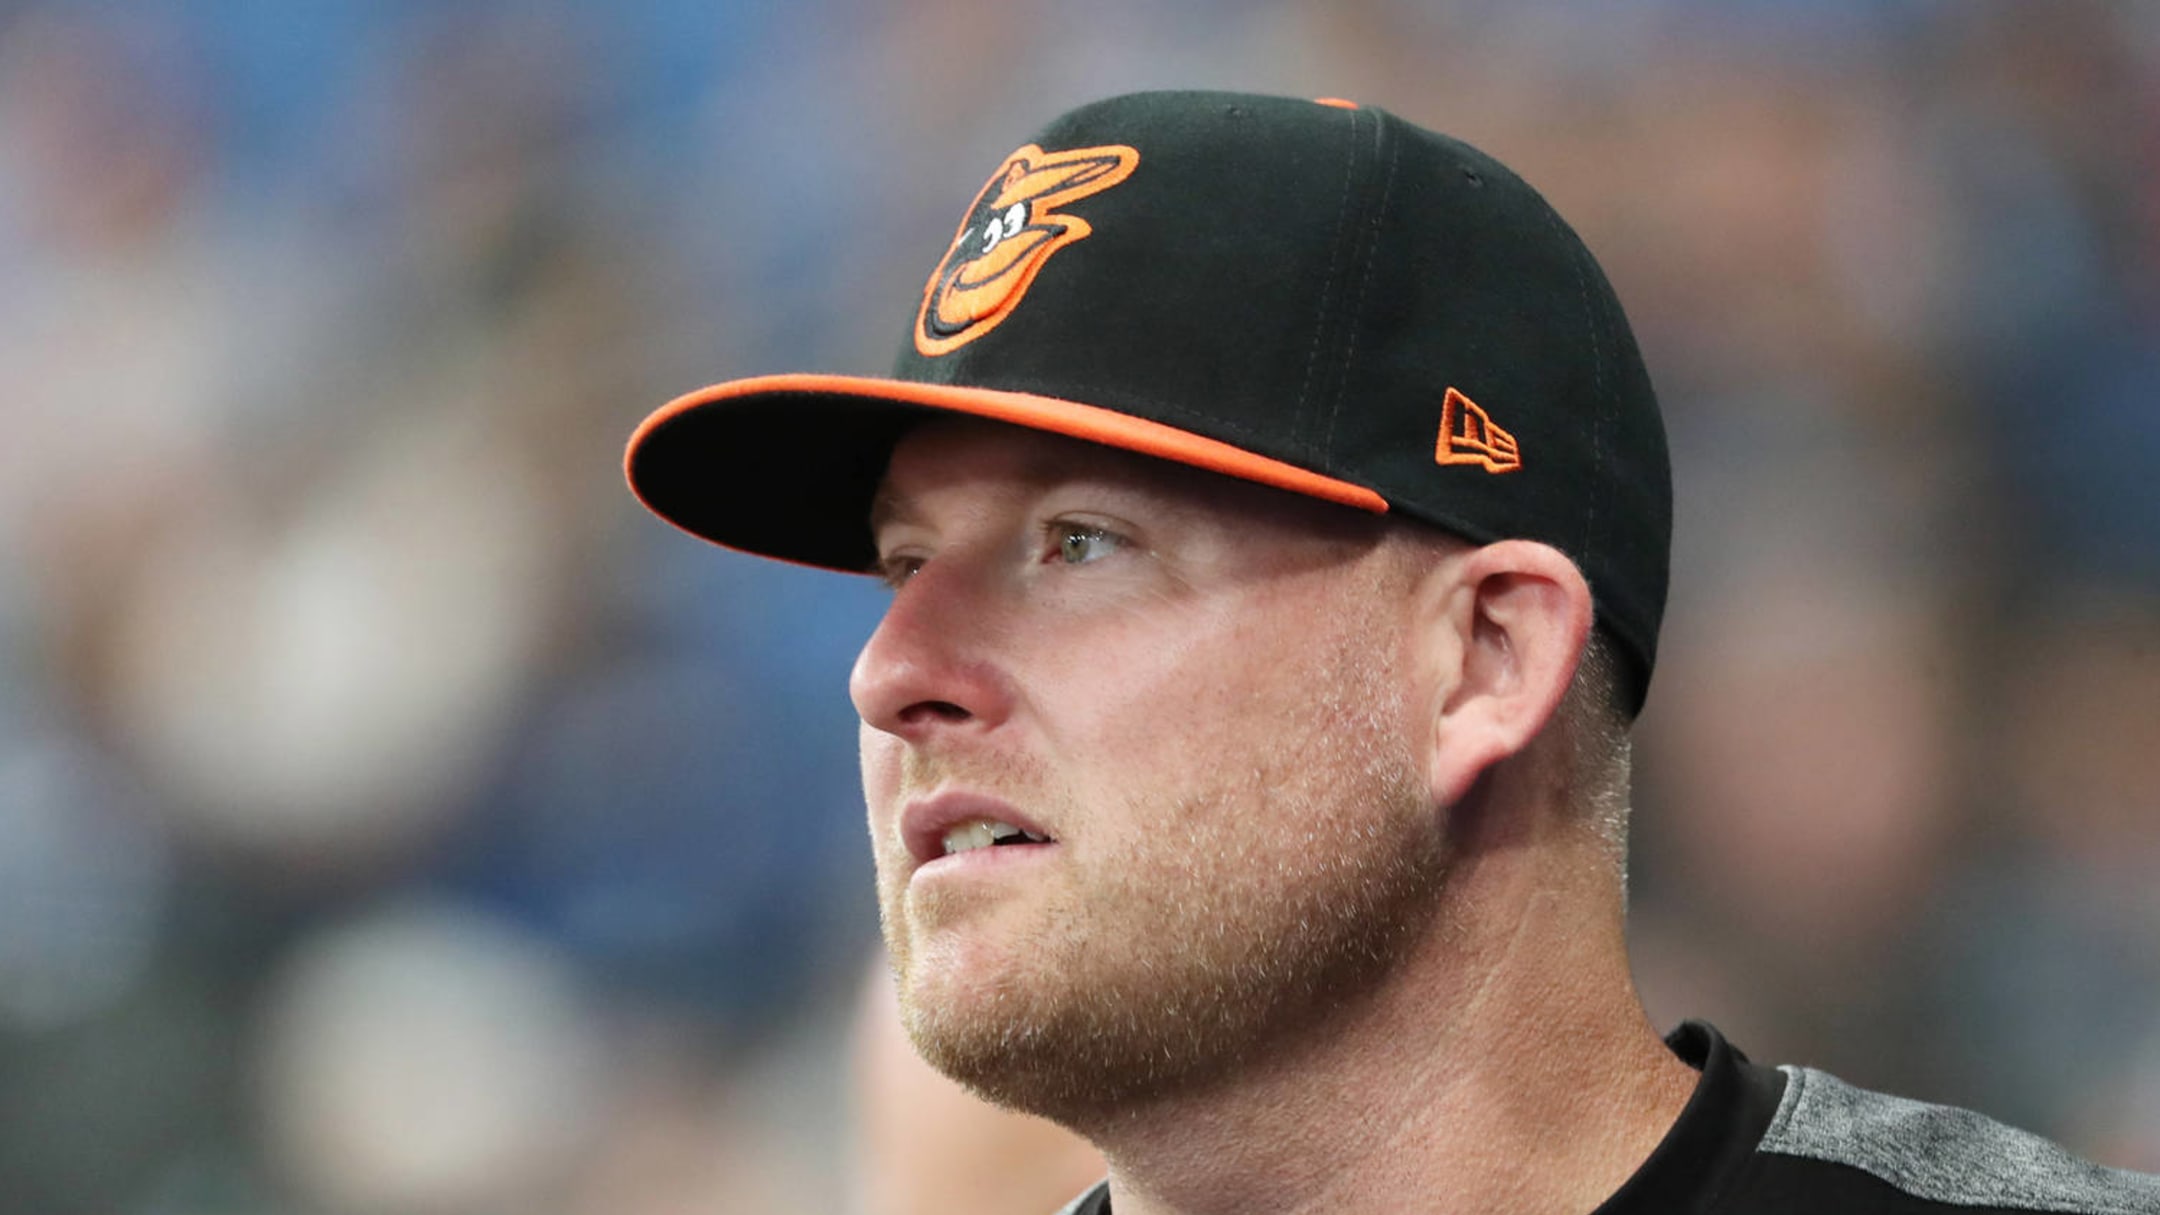 Could Yankees replace Eric Chavez with Mark Trumbo on coaching staff?